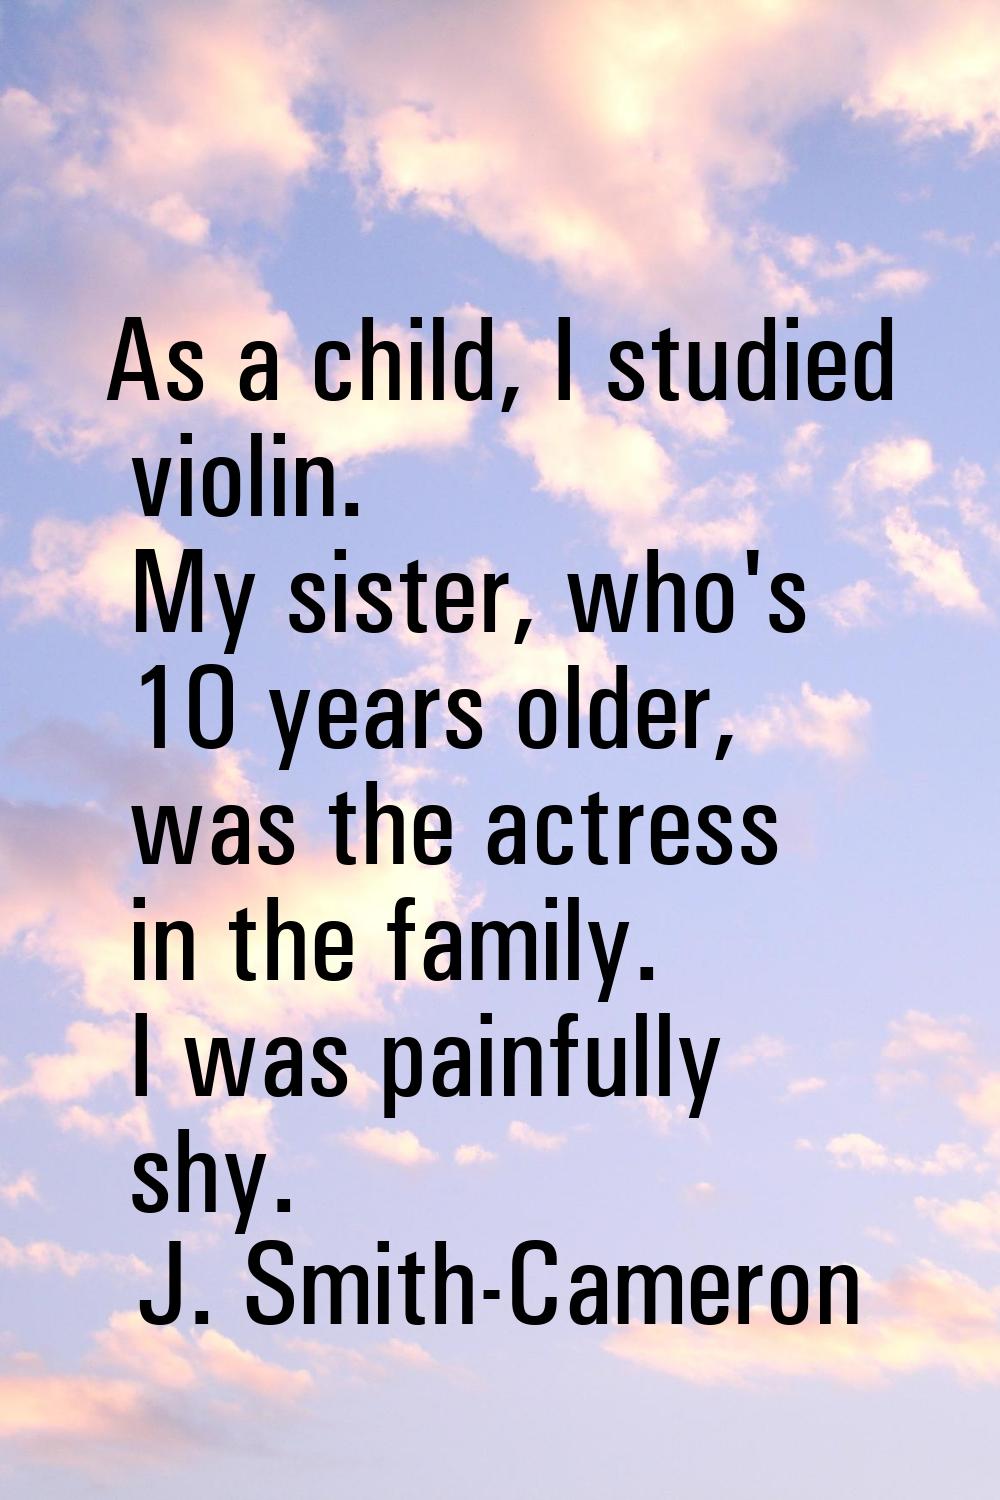 As a child, I studied violin. My sister, who's 10 years older, was the actress in the family. I was